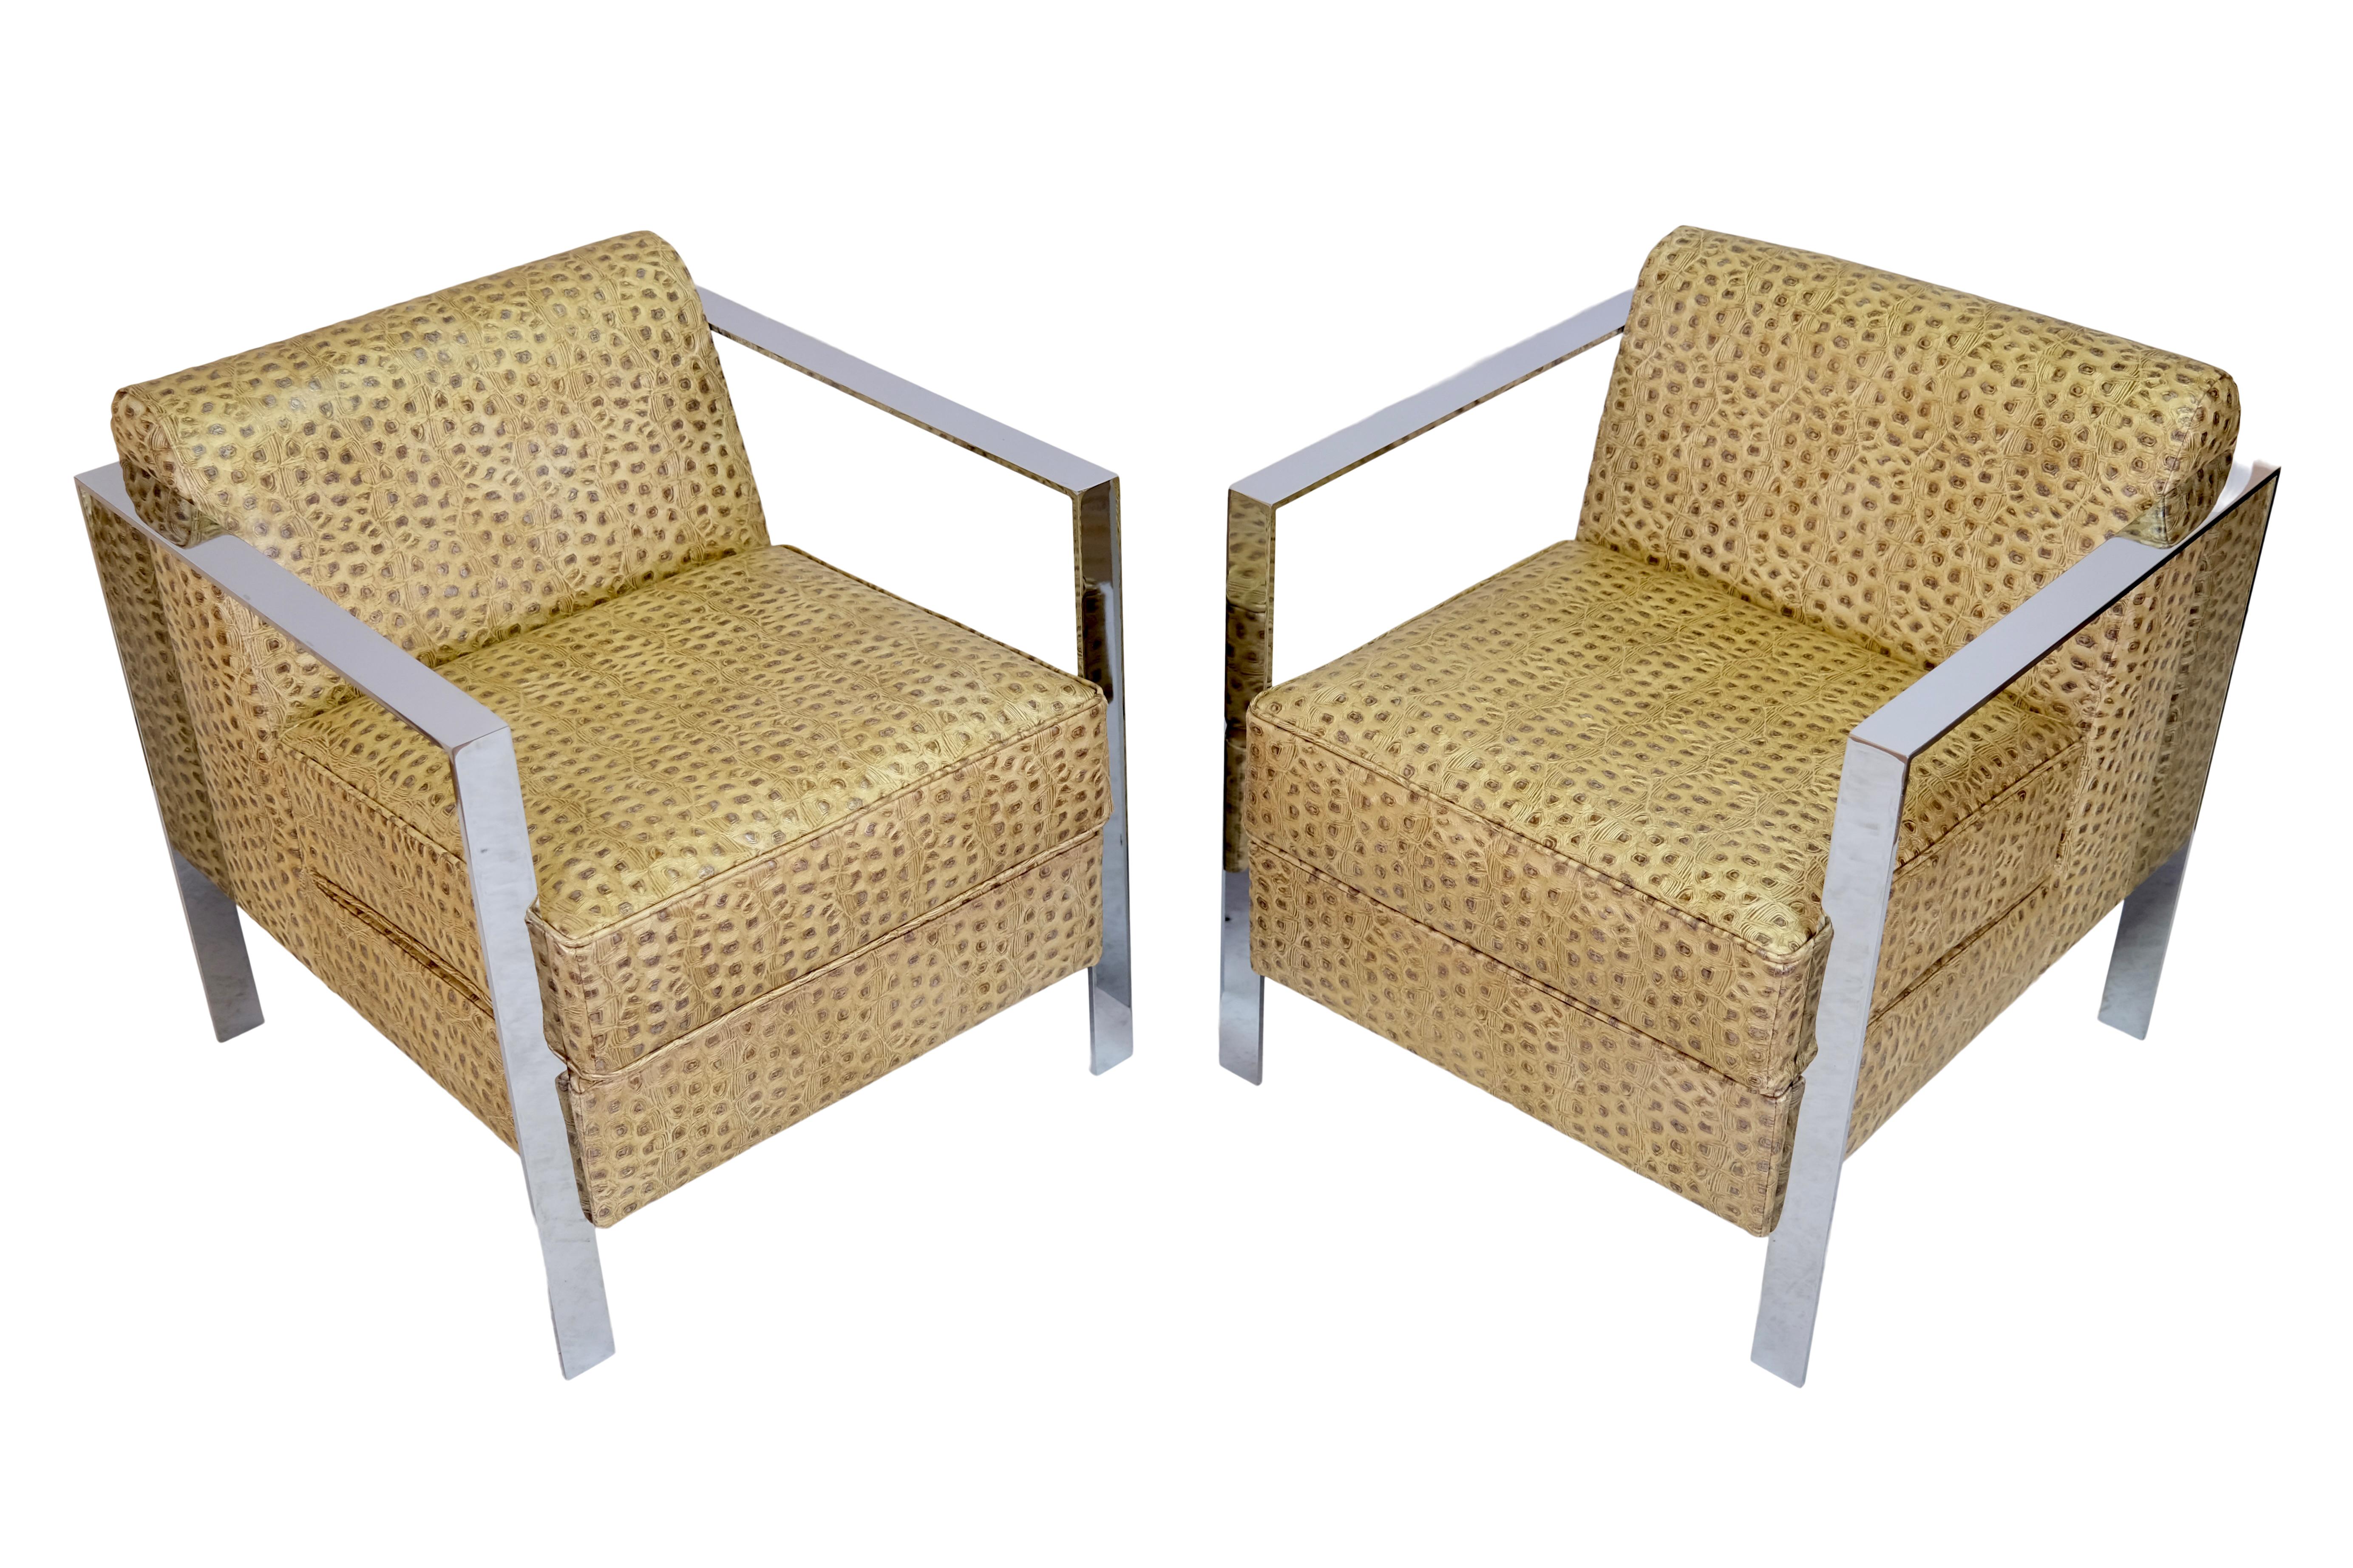 20th Century Pair of Mid-Century Modern Chromed Steel Tube Chairs with Embossed Upholstery For Sale